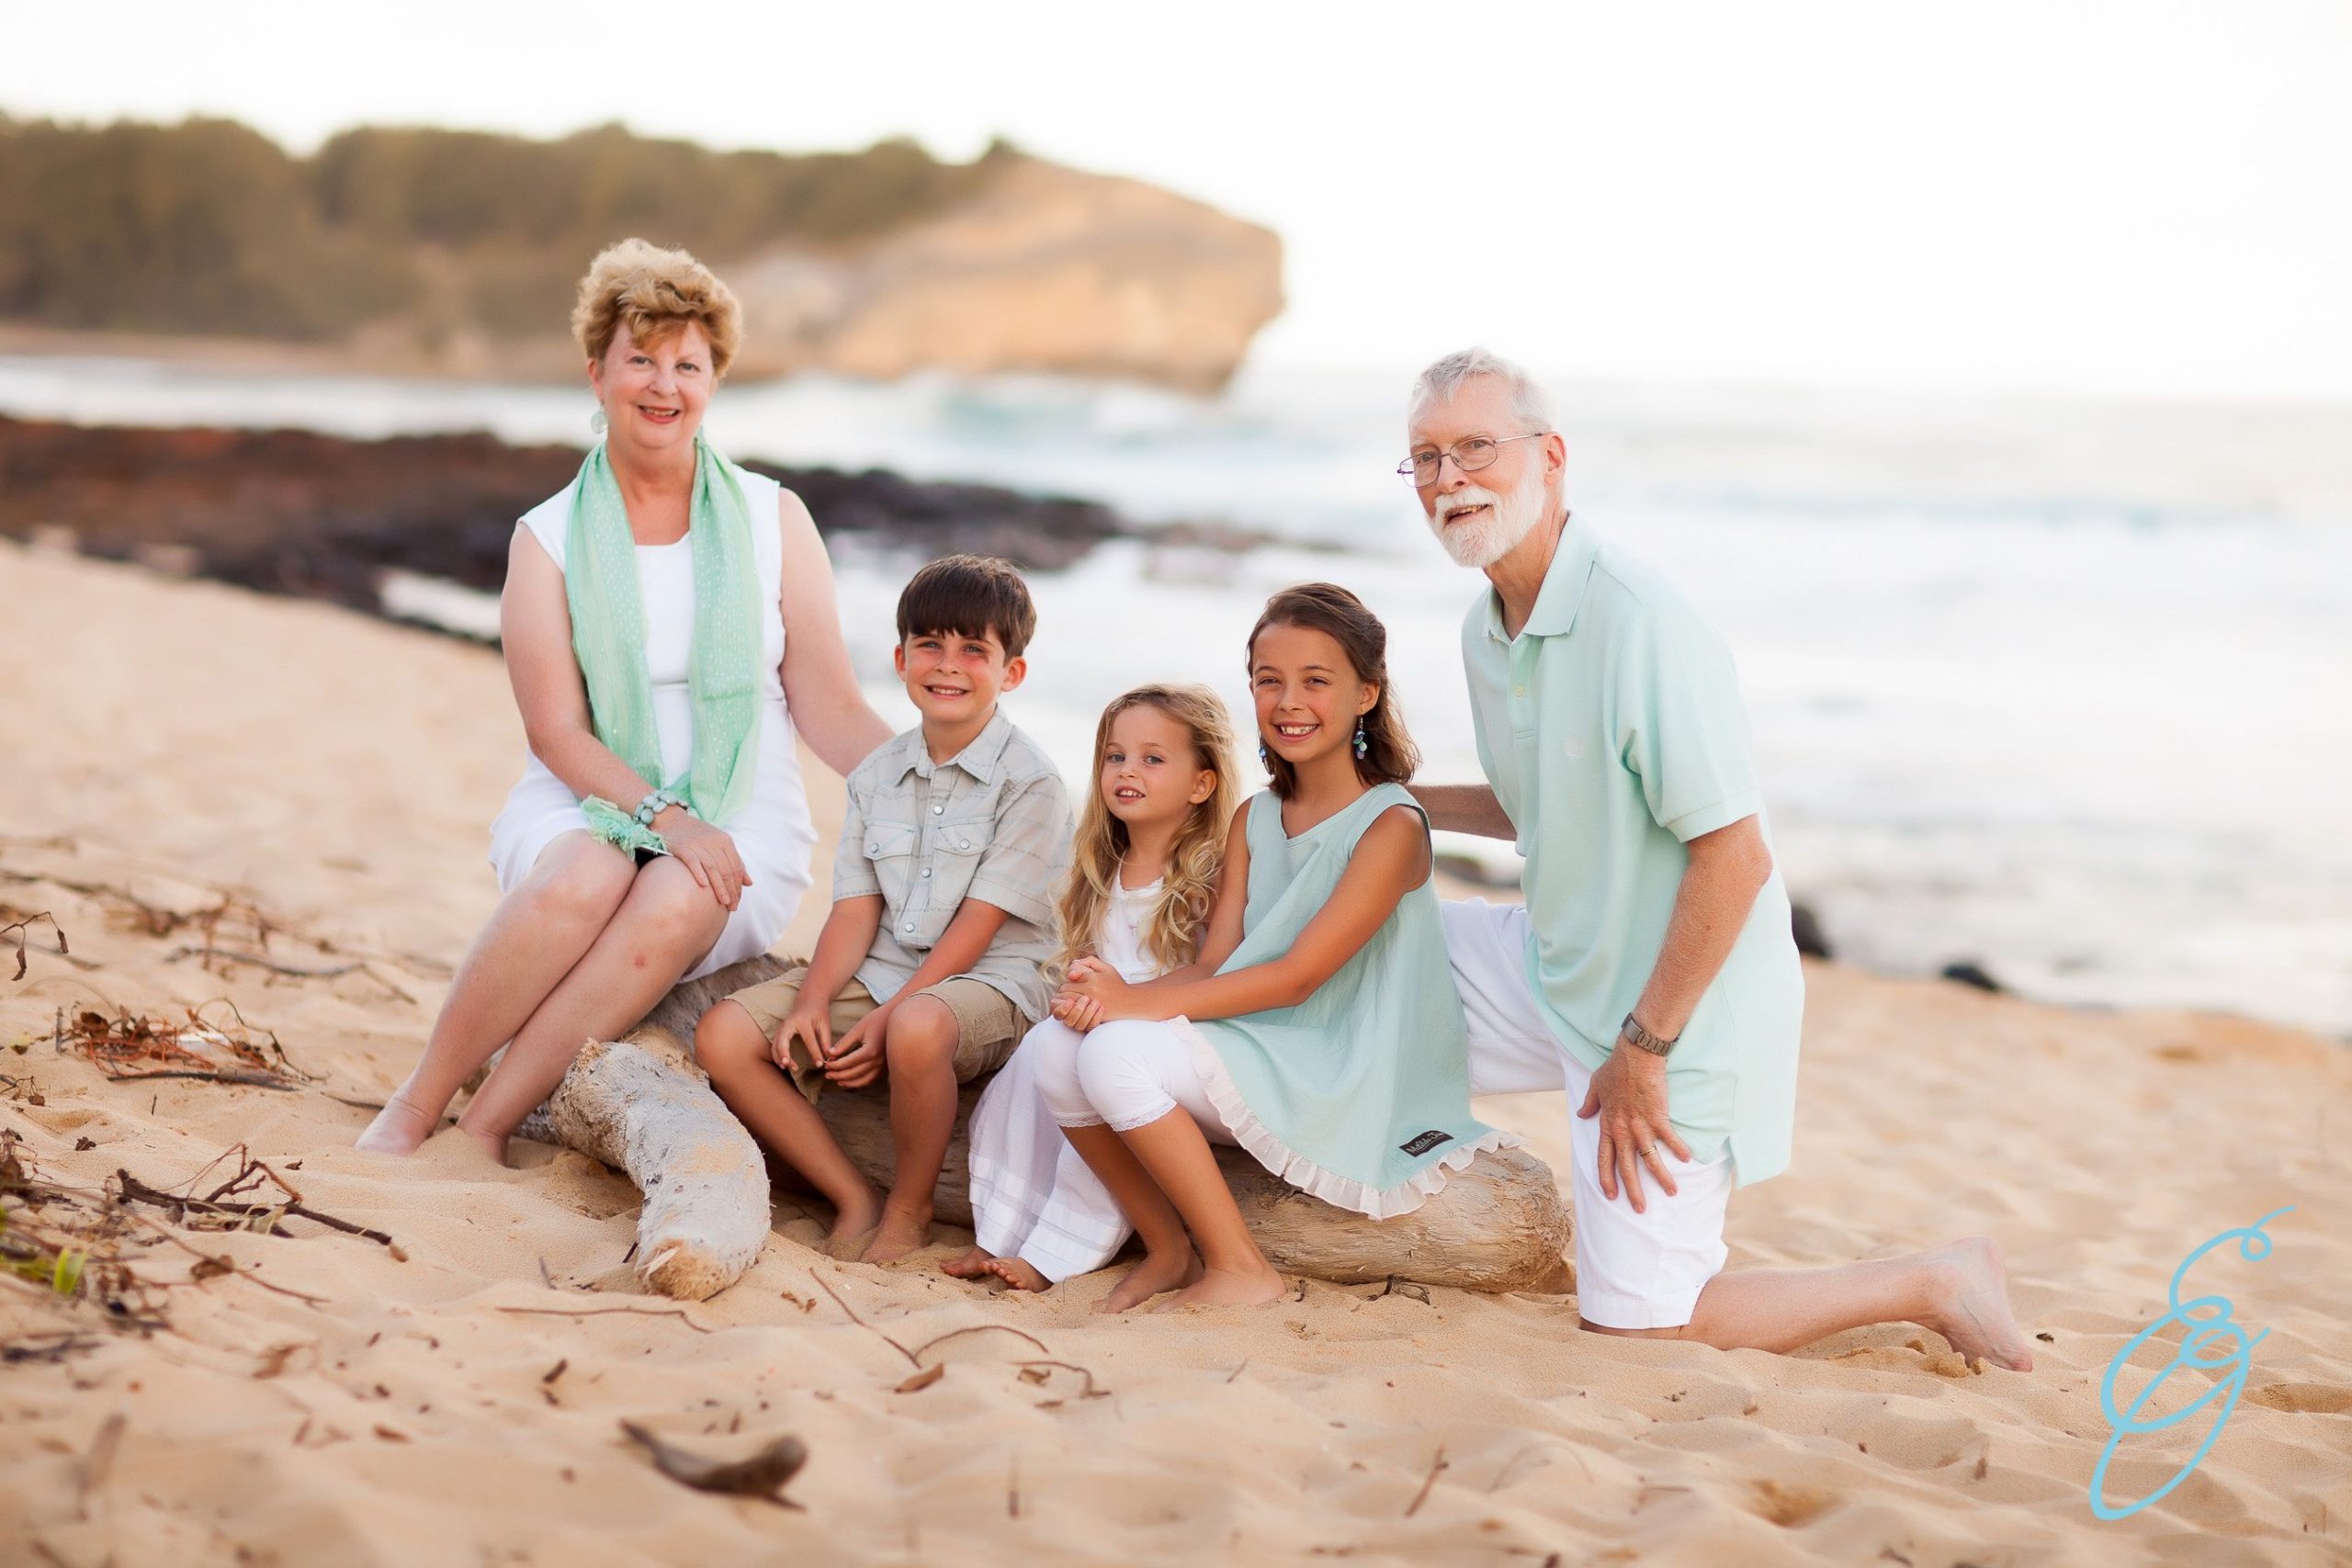 family-photoshoots.-5-scaled 70+ Best Family Photoshoot Outfit Ideas That You Must Check